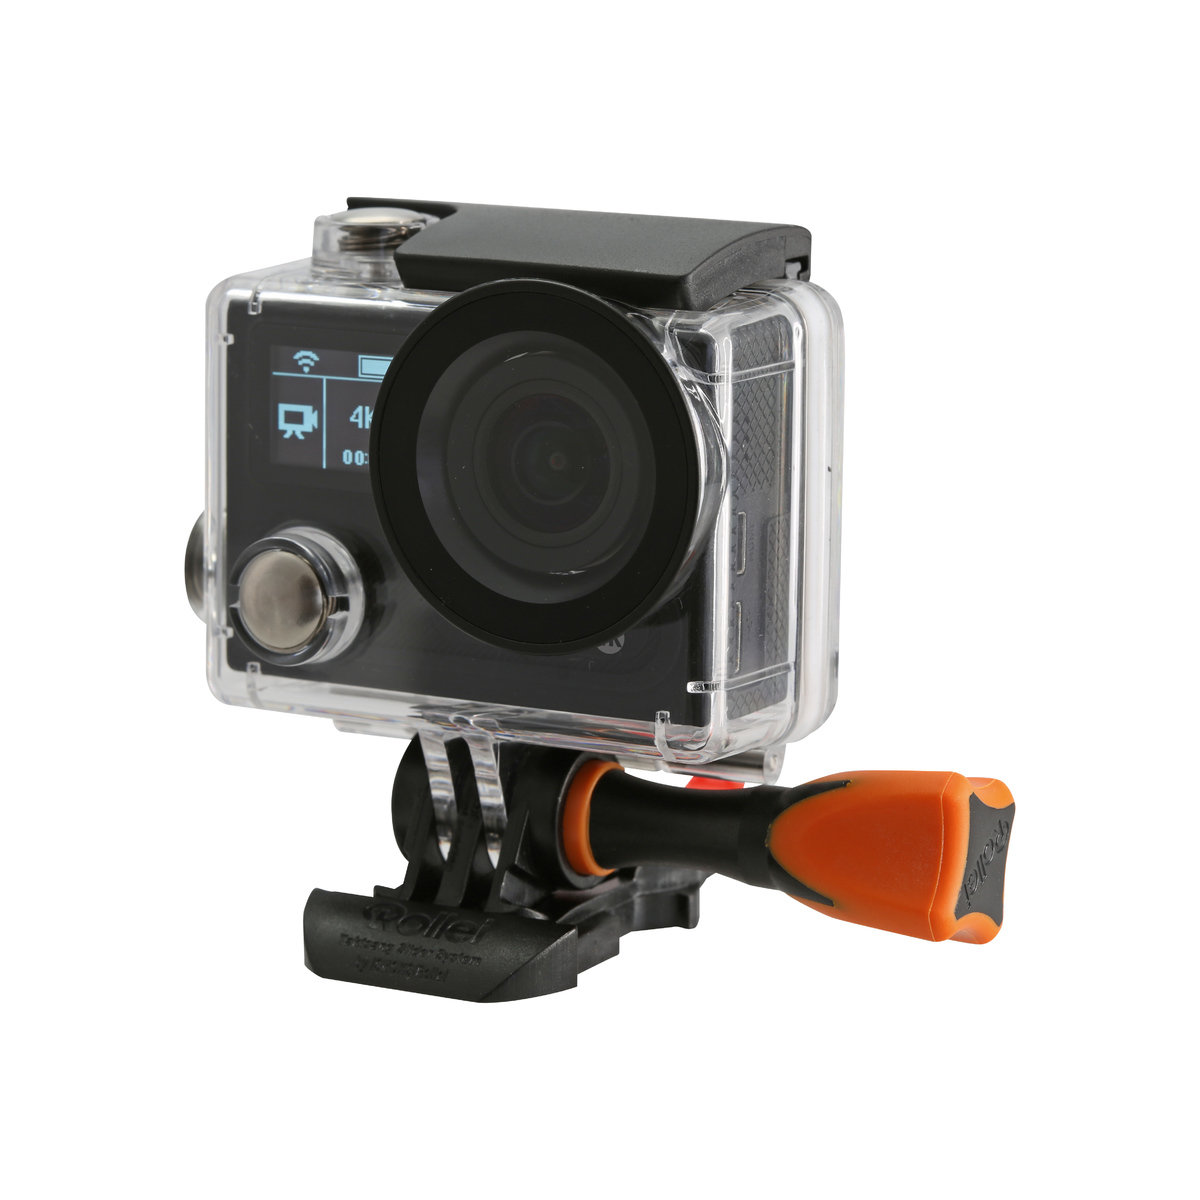 Rollei Actioncam 100 Driver